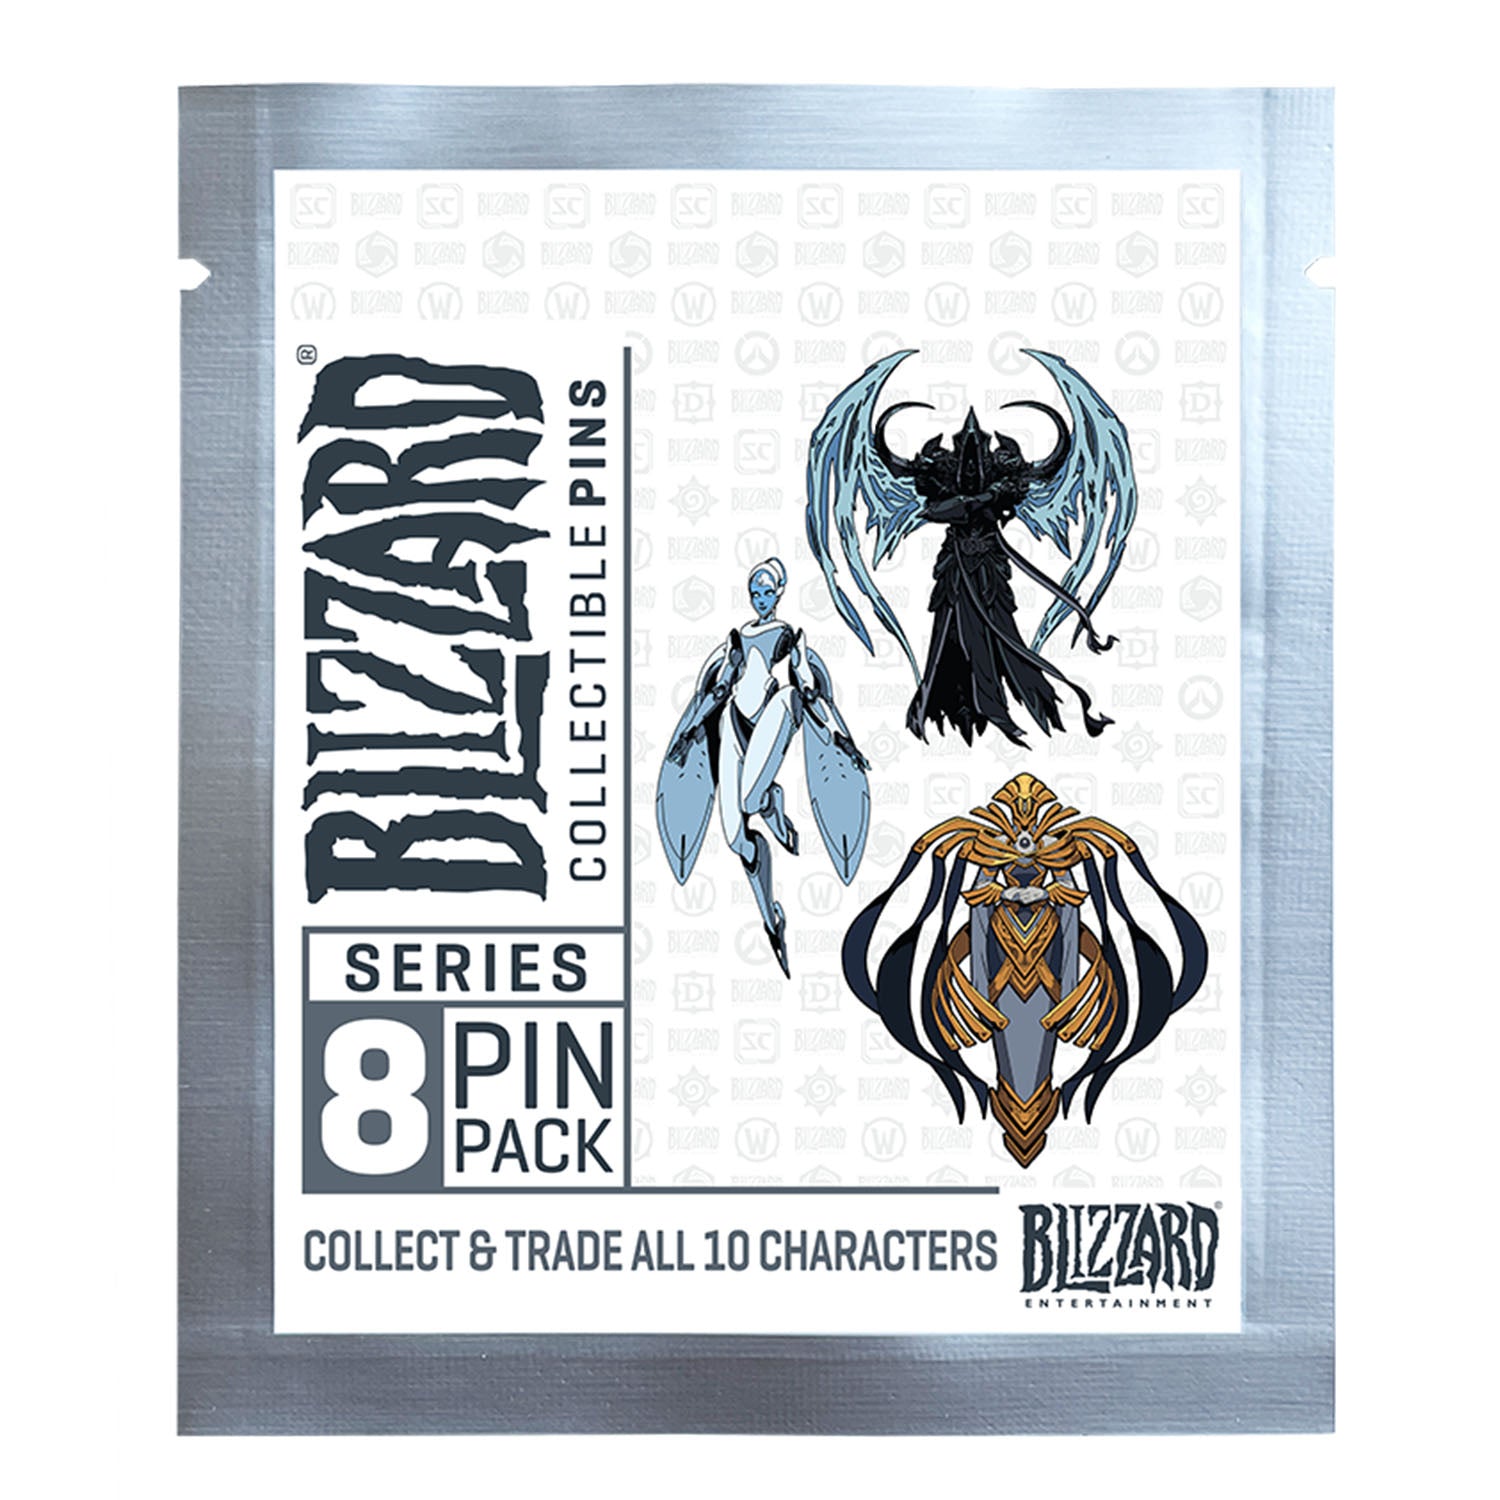 Blizzard Series 8 Blind Packs- 5 Pack Set in Gold - Front View